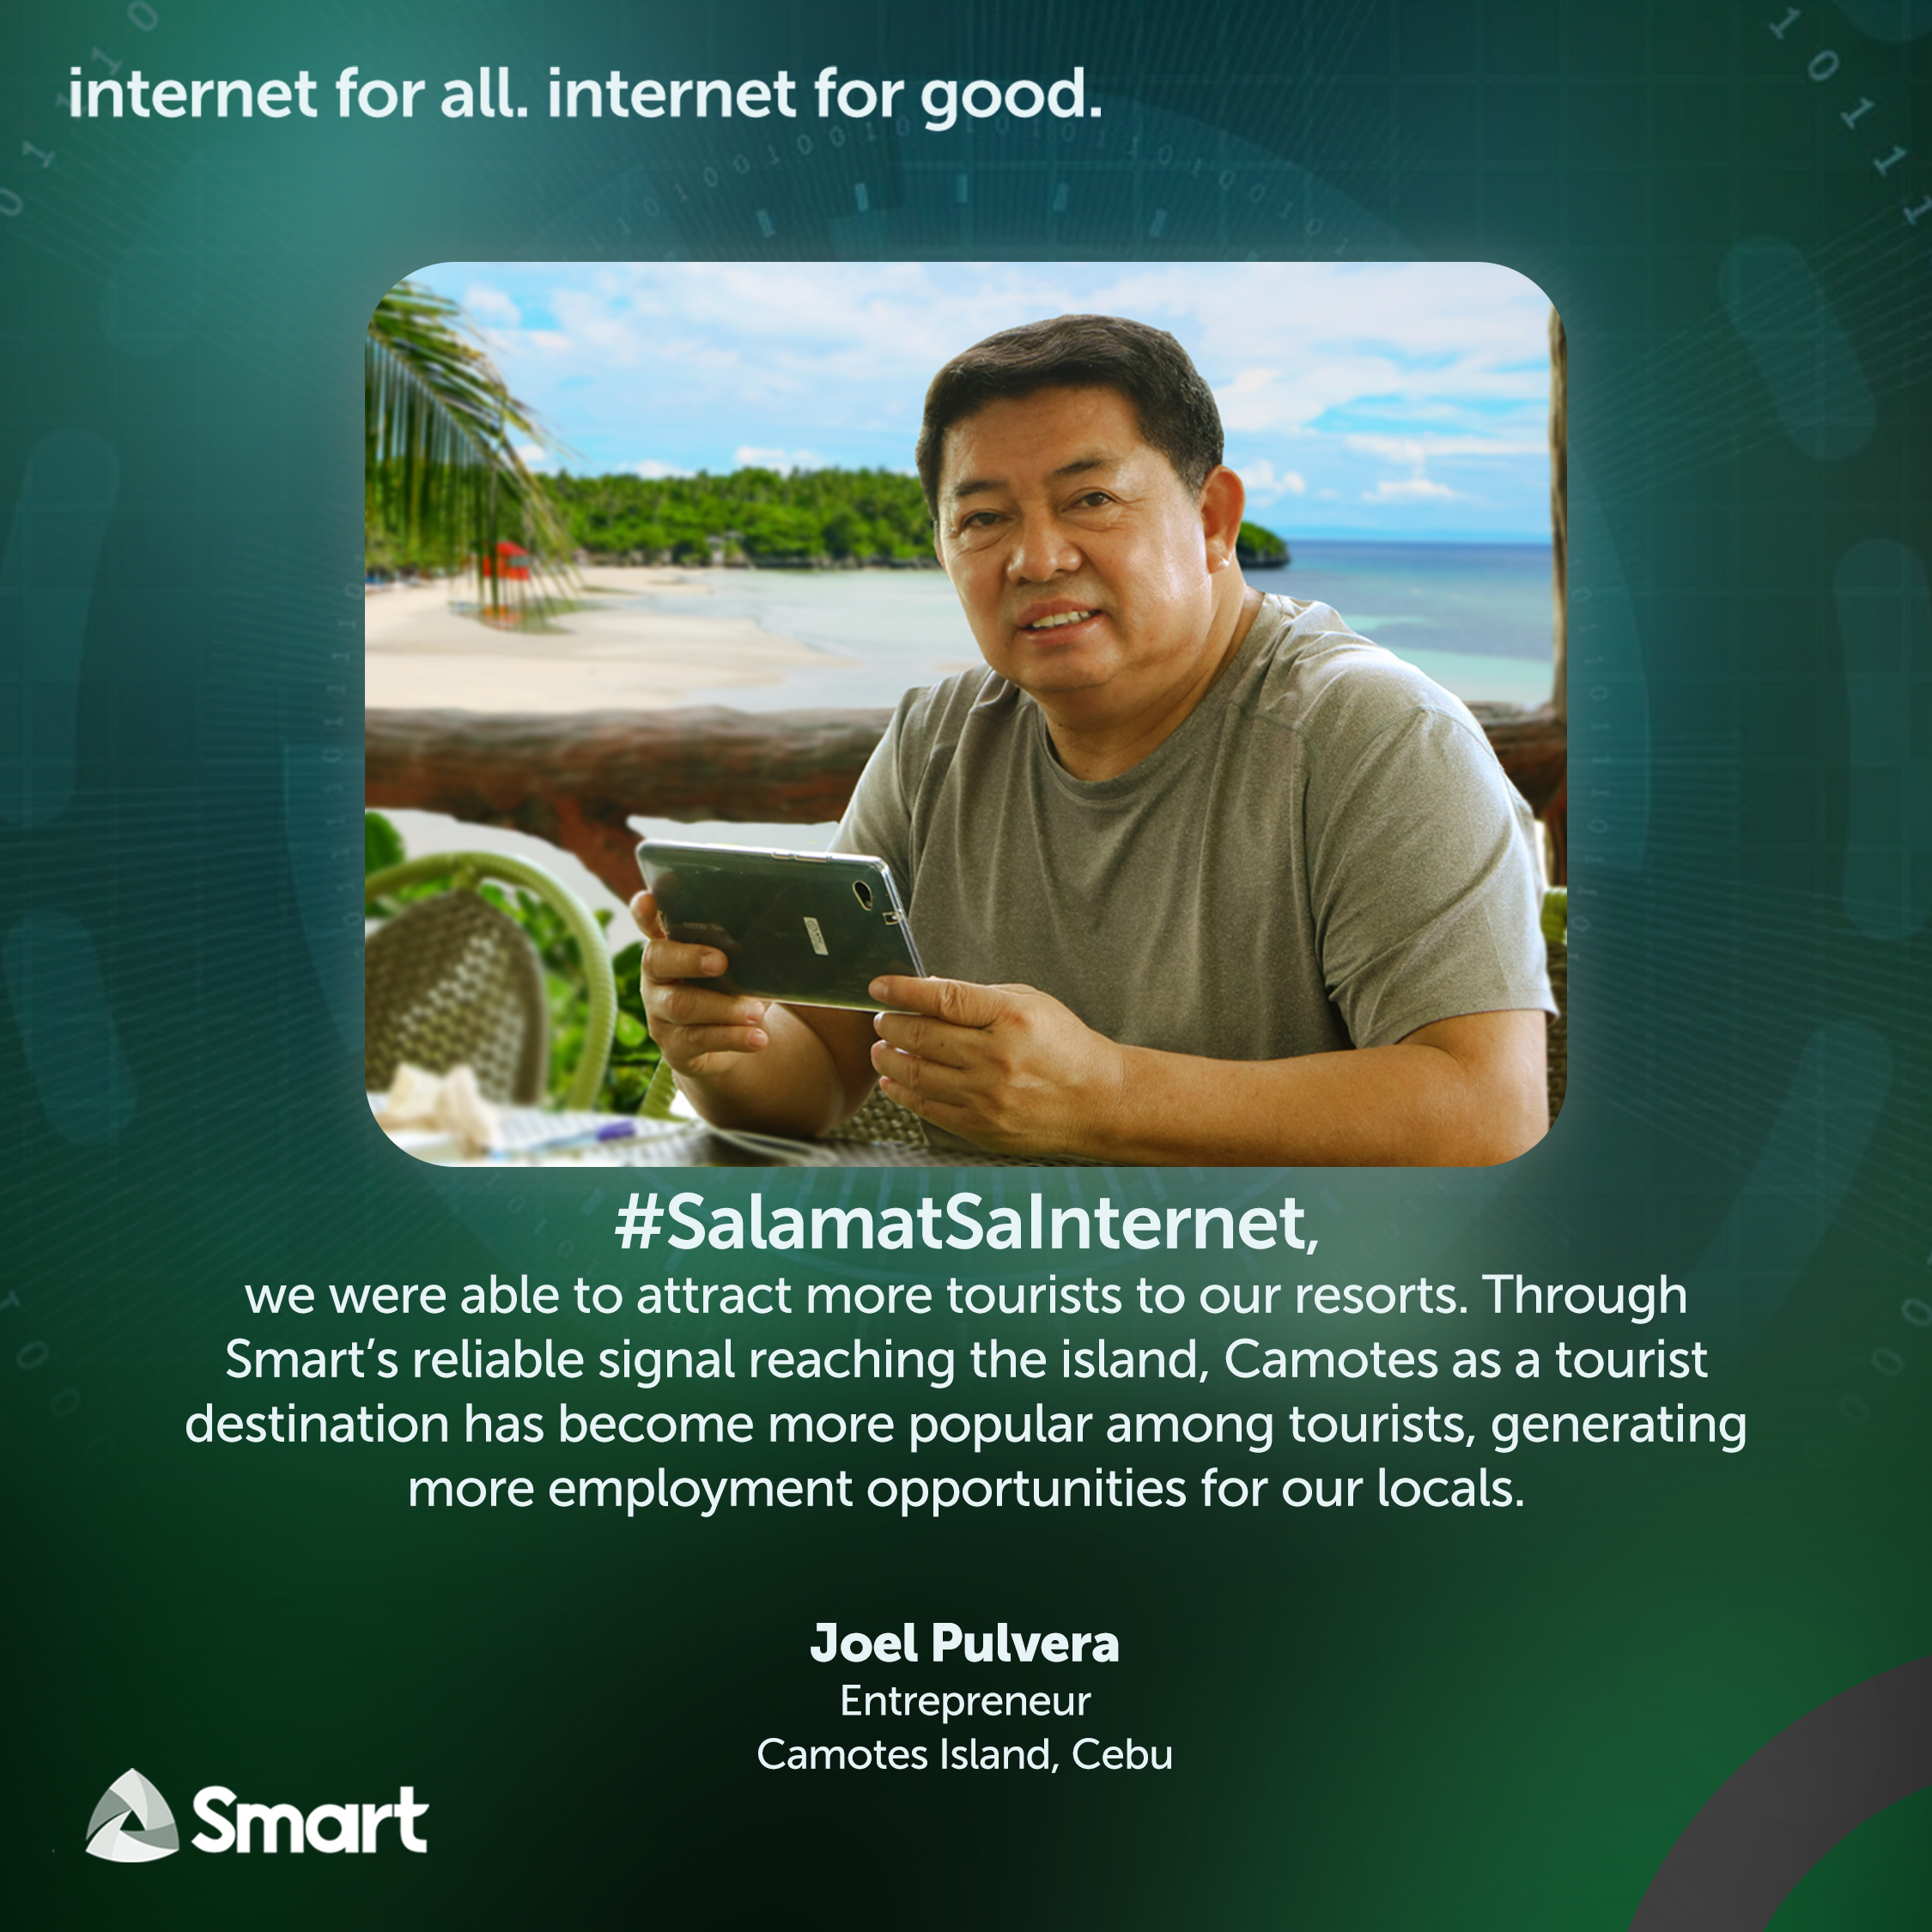 Smart’s reliable network boosts tourism livelihood in Camotes Island